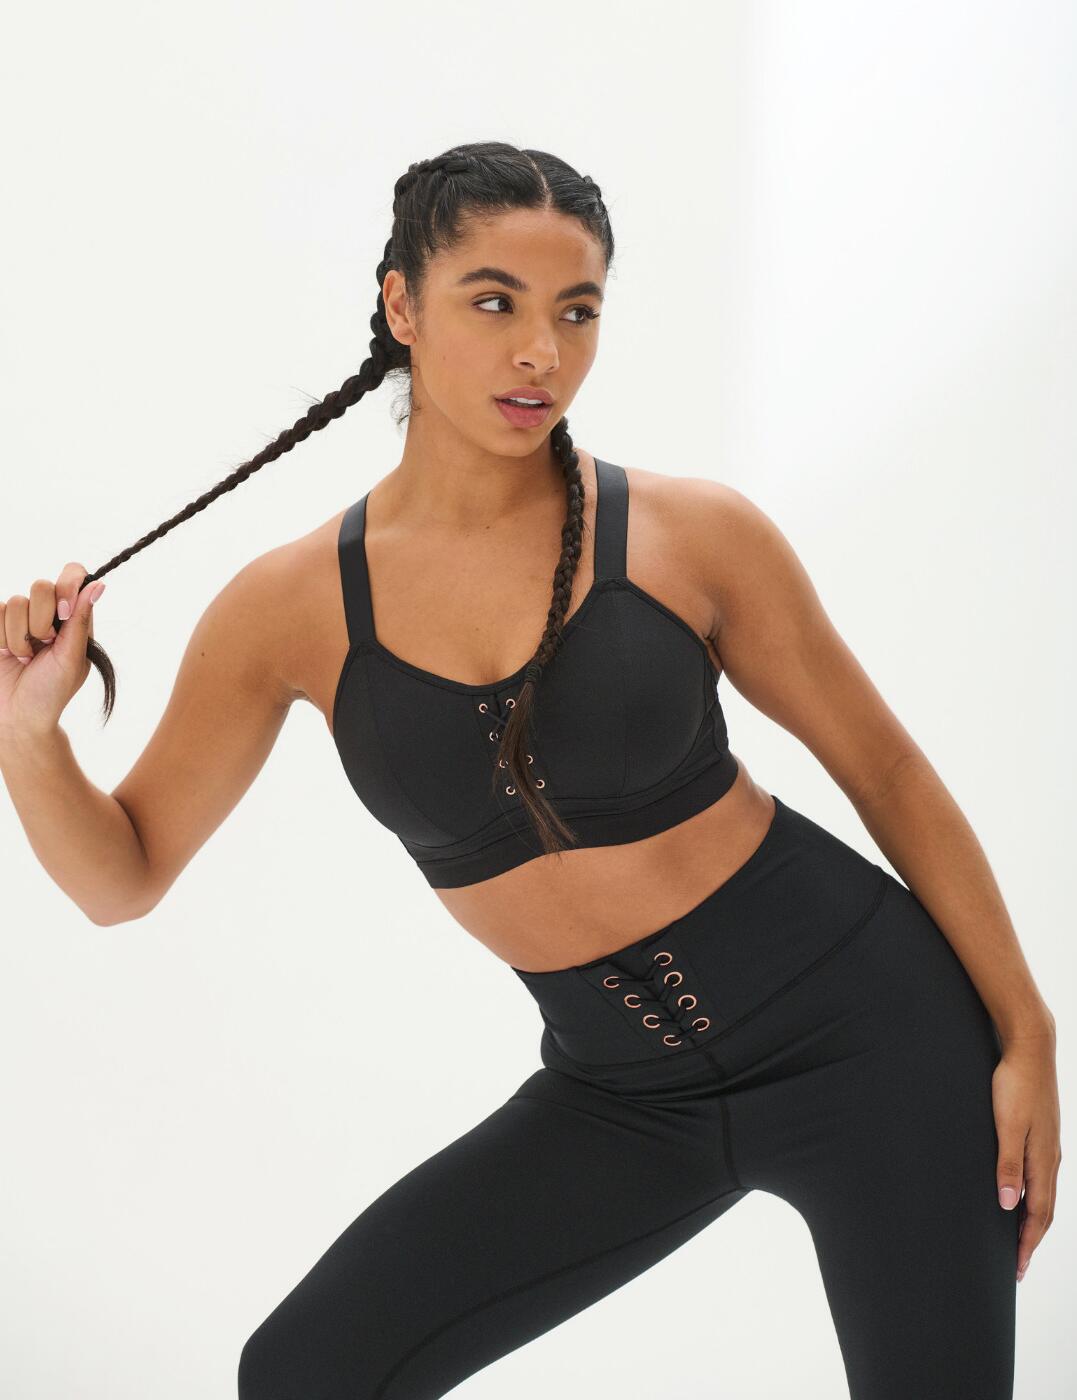 Pour Moi Energy Aspire Underwired Sports Bra - Belle Lingerie  Pour Moi  Energy Aspire Underwired Padded Sports Bra - Belle Lingerie